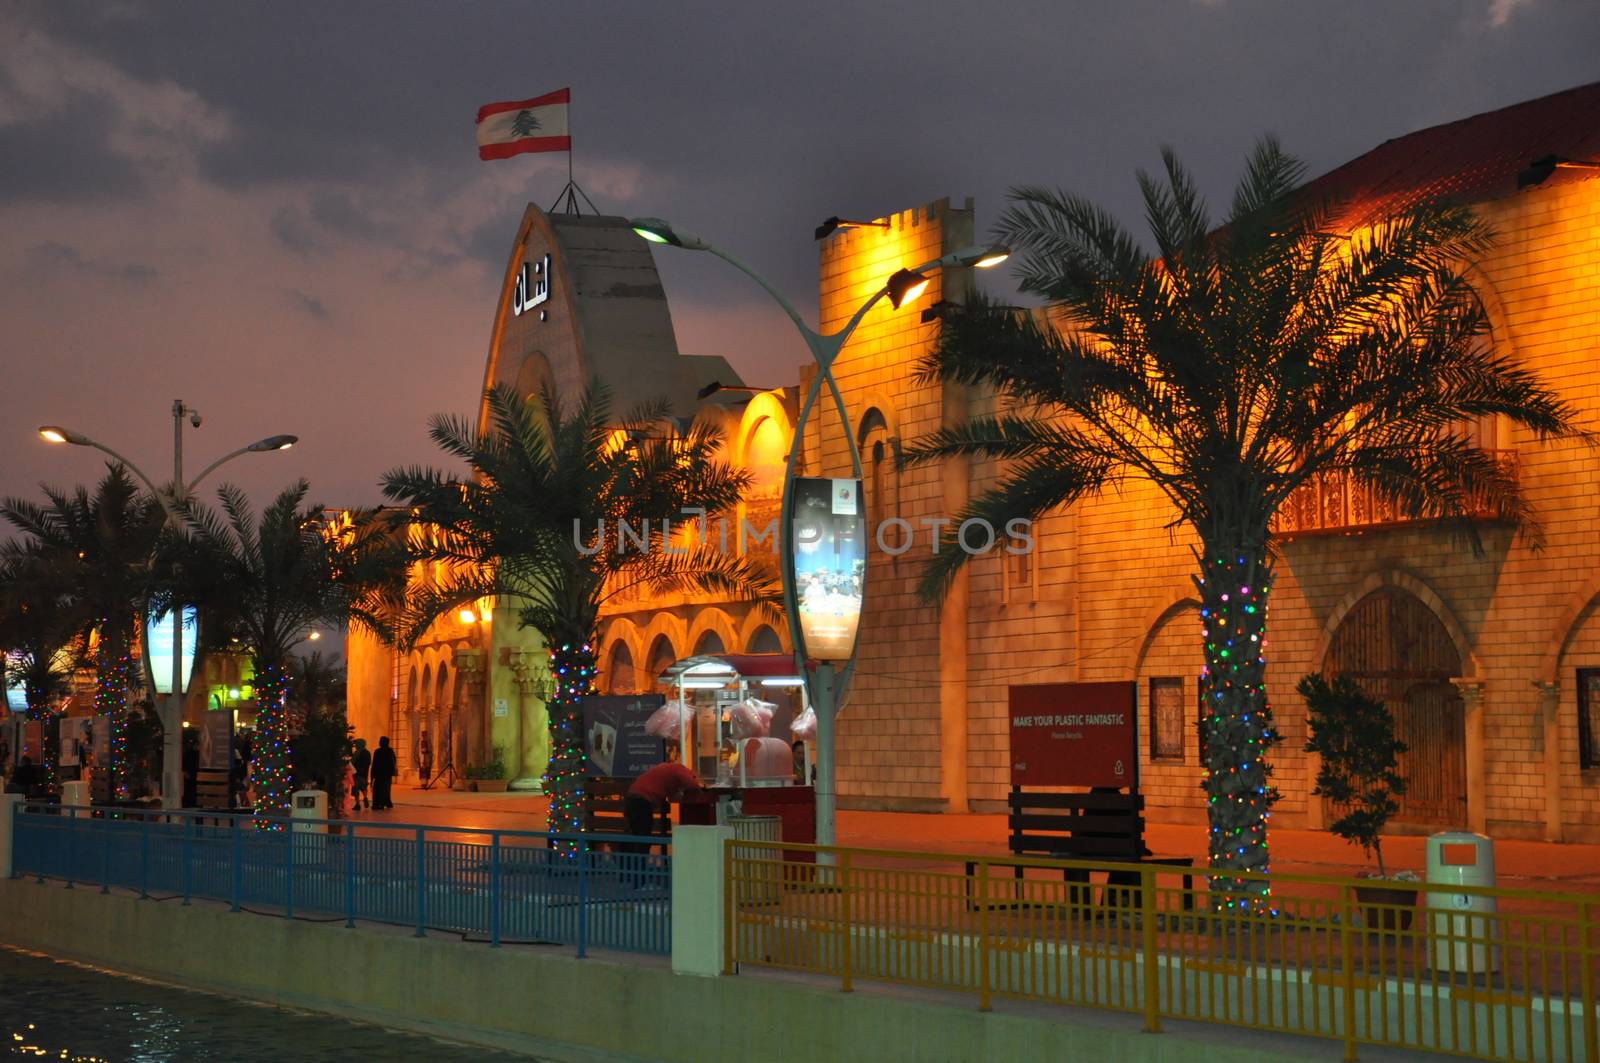 Lebanon pavilion at Global Village in Dubai, UAE. It is claimed to be the world's largest tourism, leisure and entertainment project.